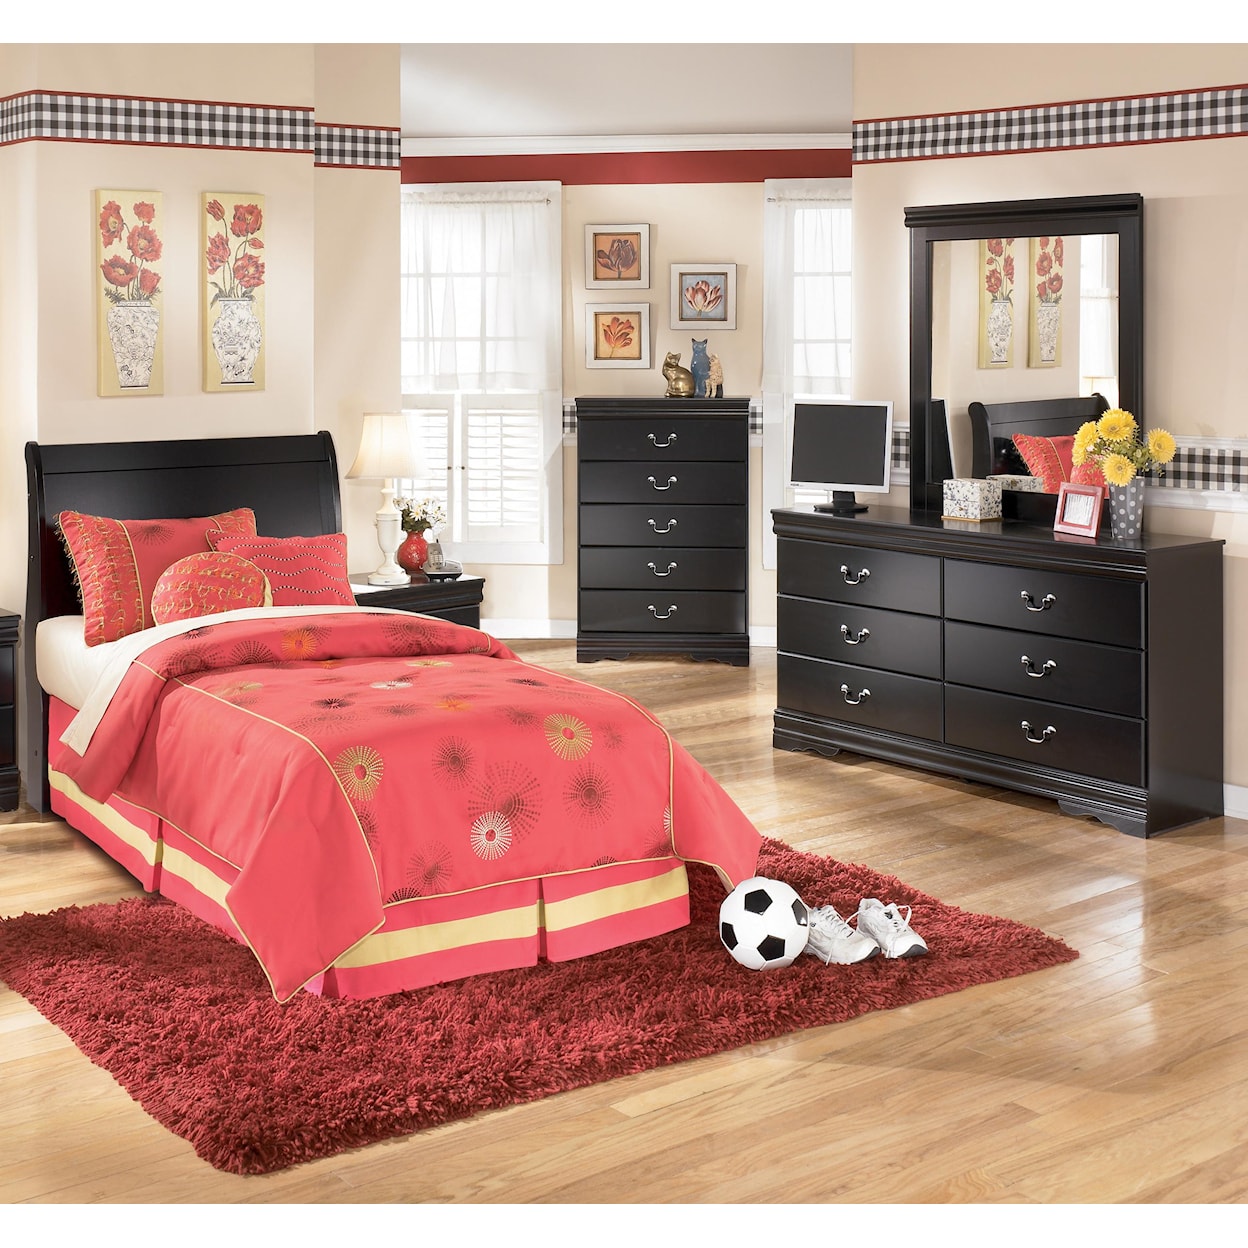 Signature Design by Ashley Furniture Huey Vineyard 3-Piece Twin Bedroom Group